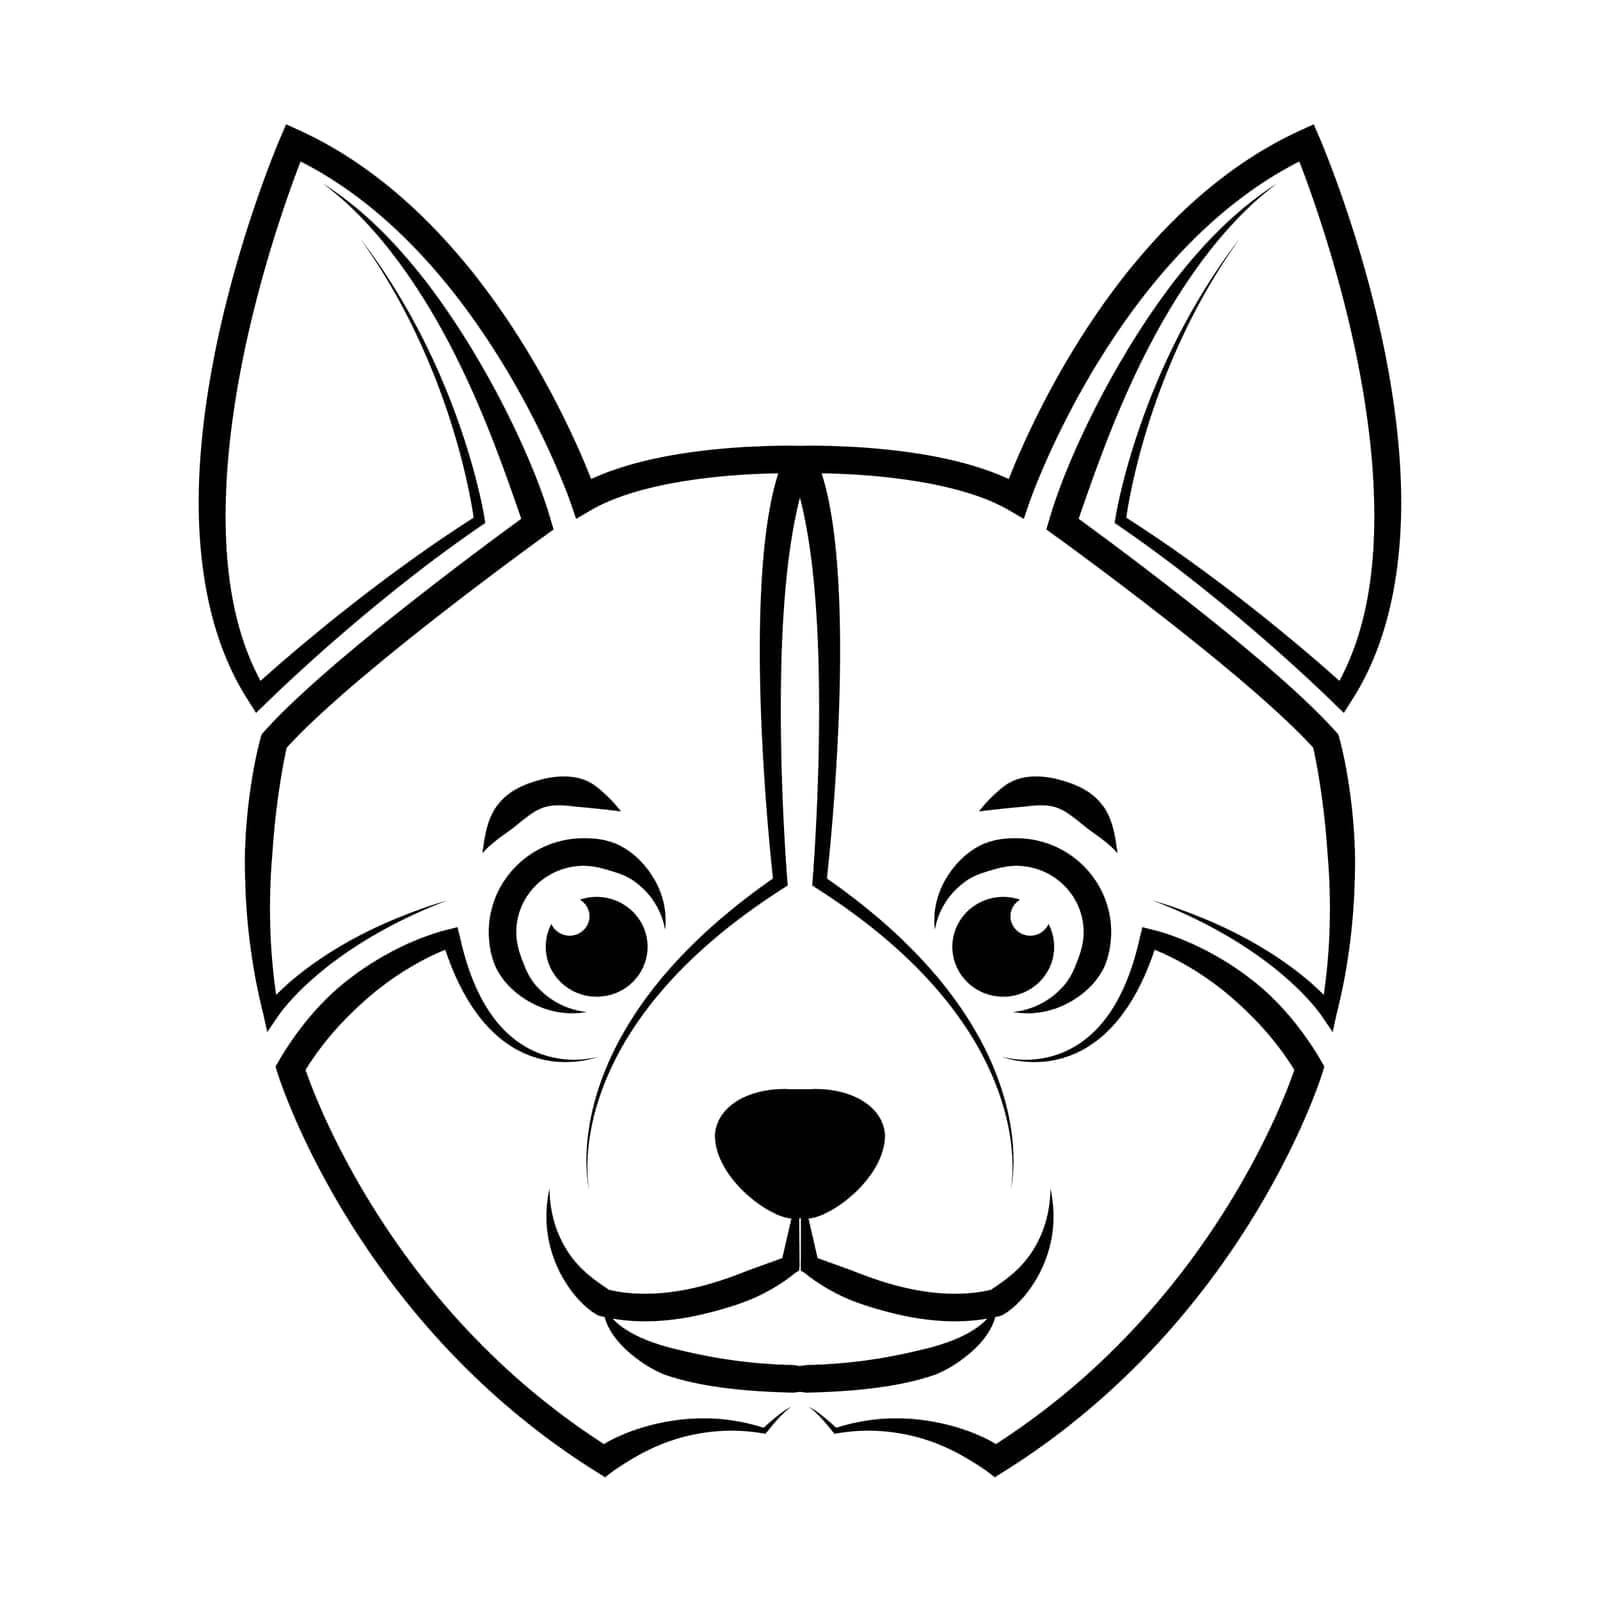 Black and white line art of shiba dog head. Good use for symbol, mascot, icon, avatar, tattoo,T-Shirt design, logo or any design. by Dear_s_Gallery